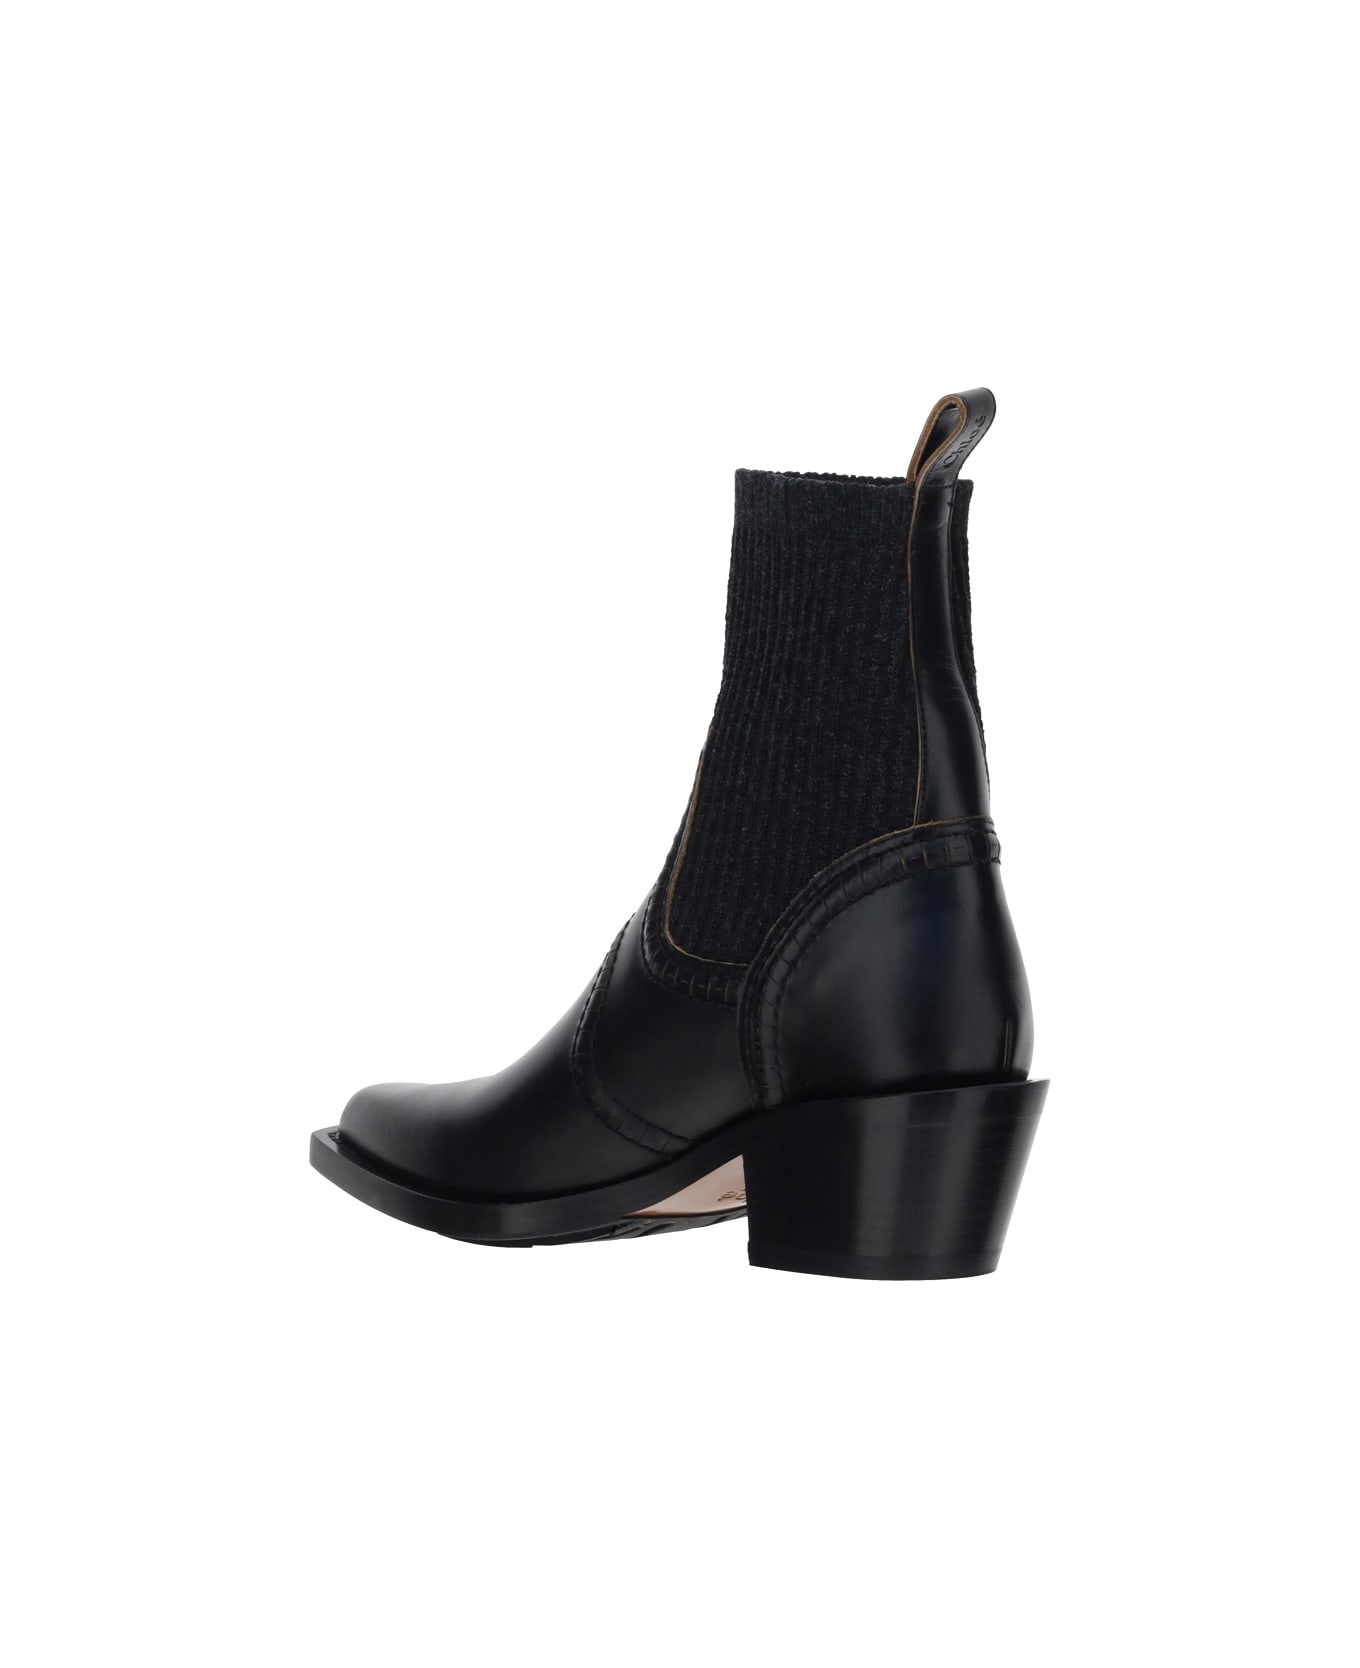 Chloé Nellie Ankle Boots - Black ブーツ